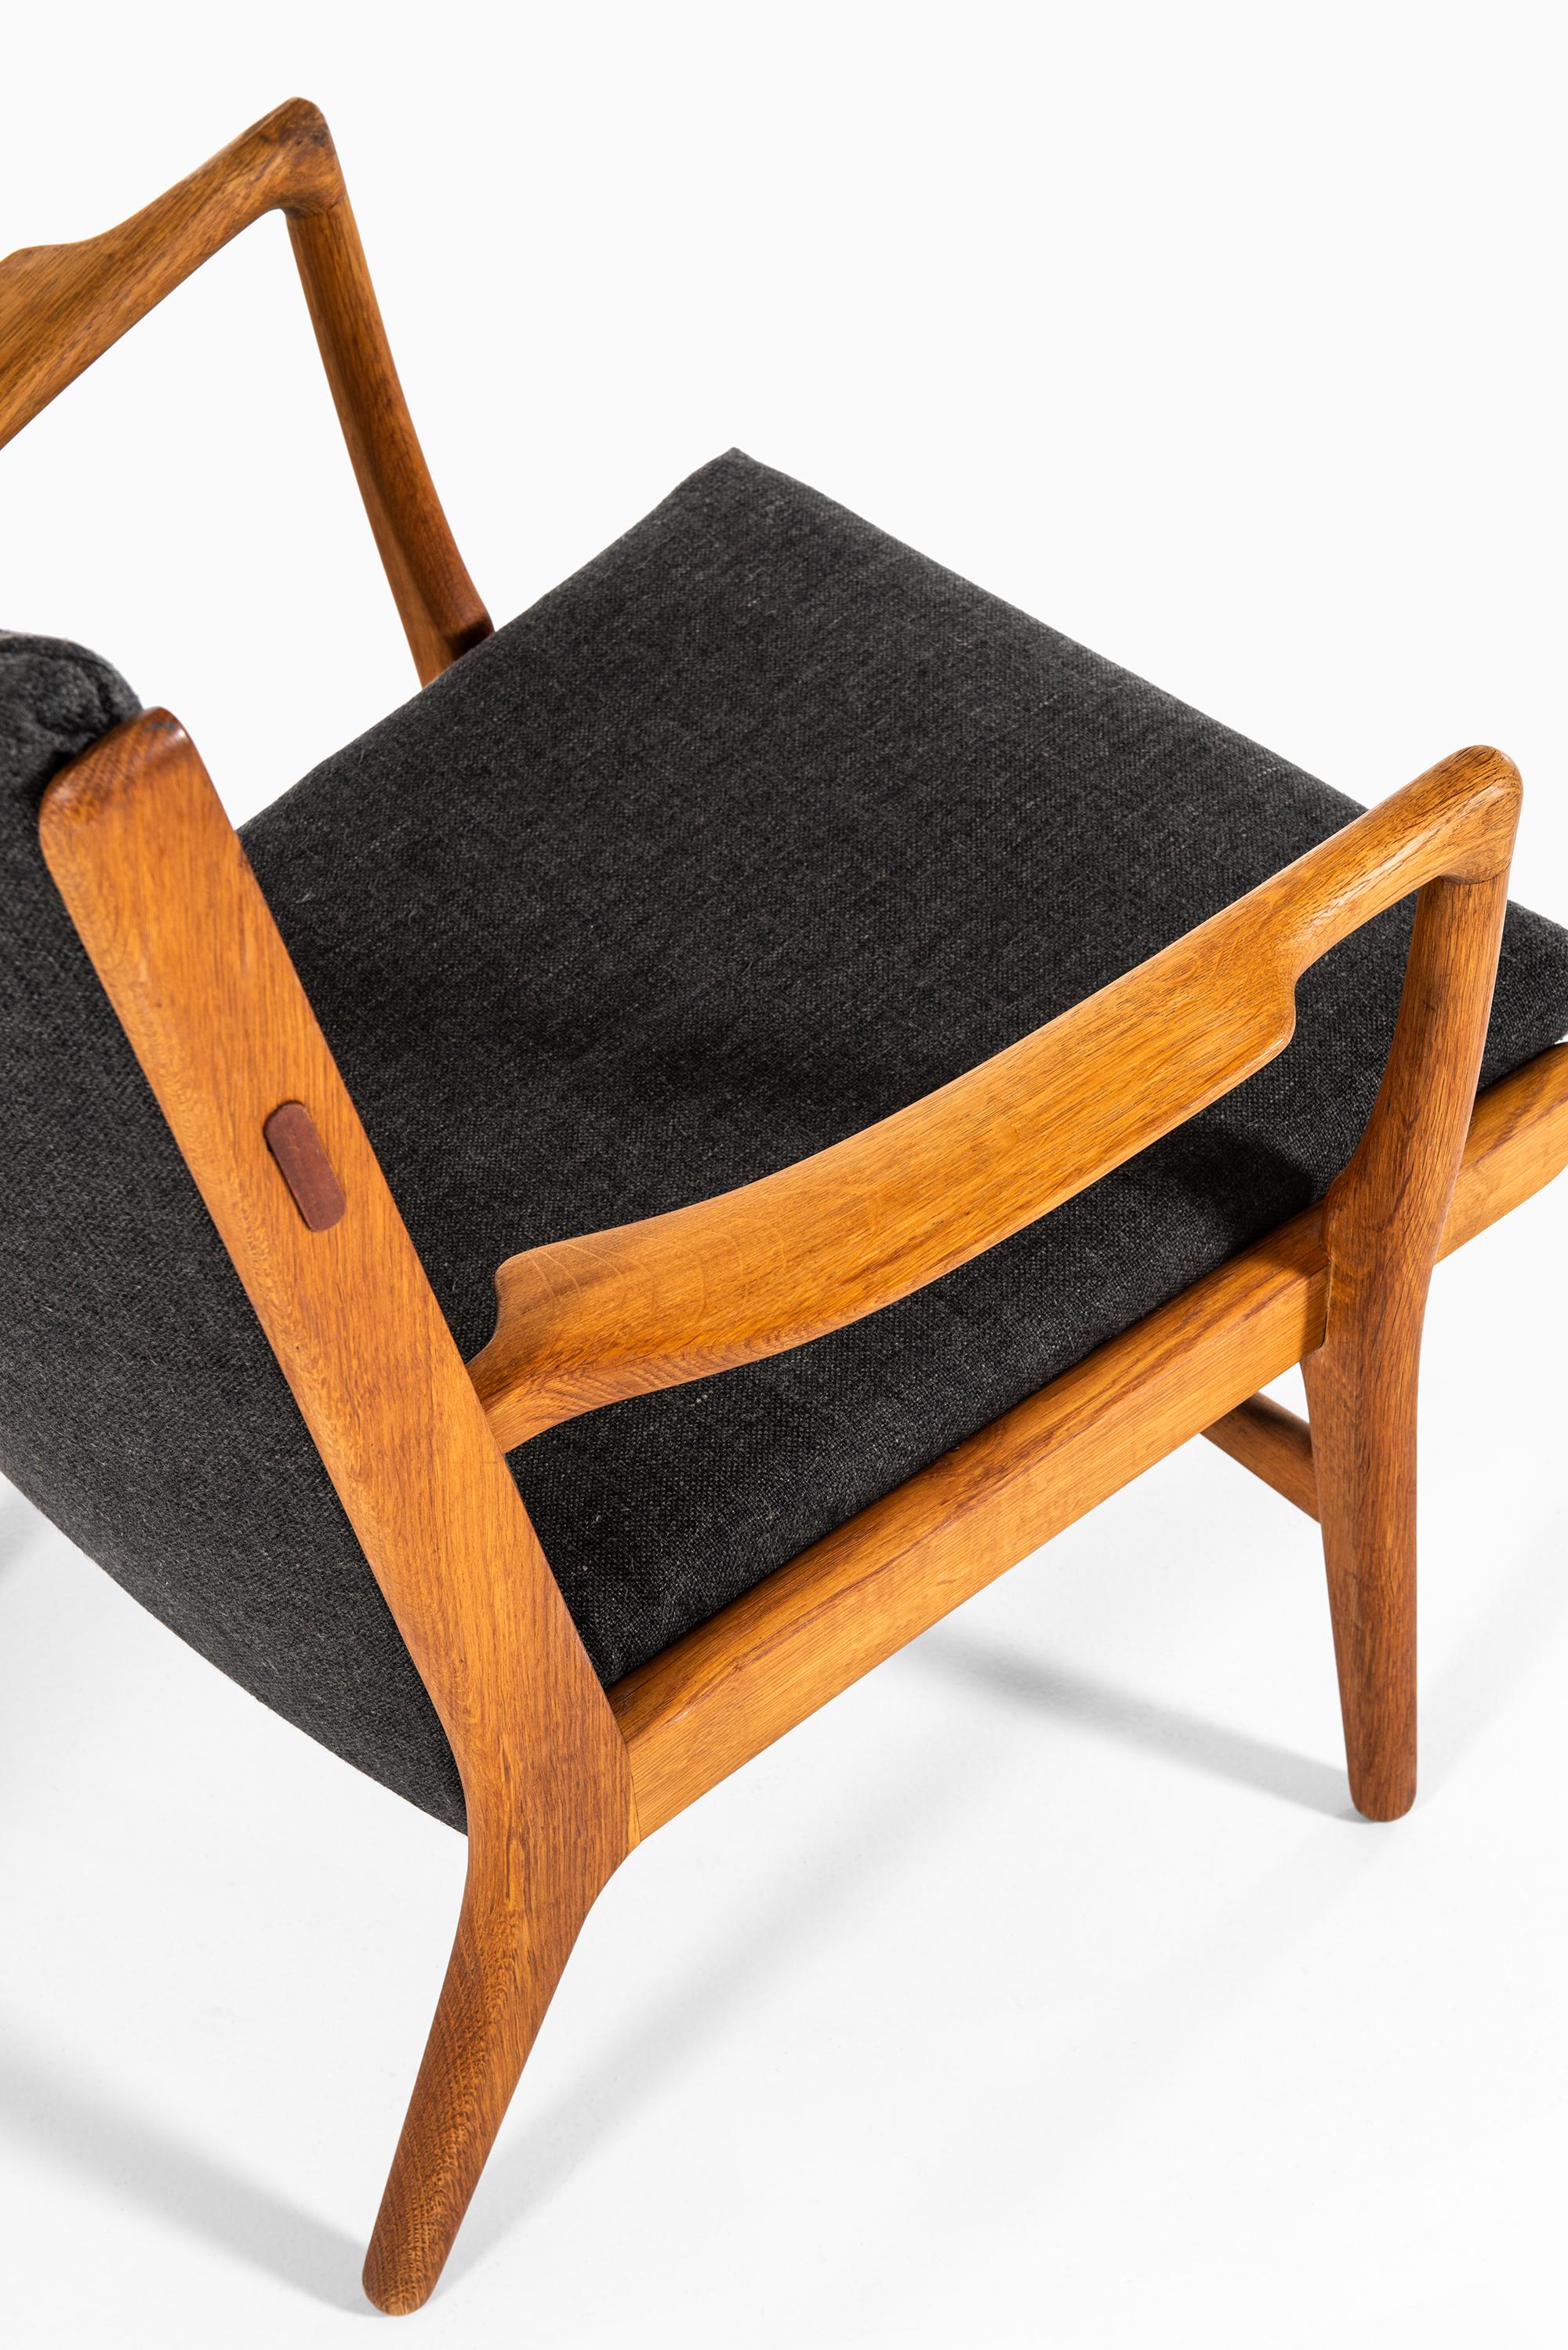 Mid-20th Century Hans Wegner AP-16 Easy Chairs Produced by AP-Stolen in Denmark For Sale